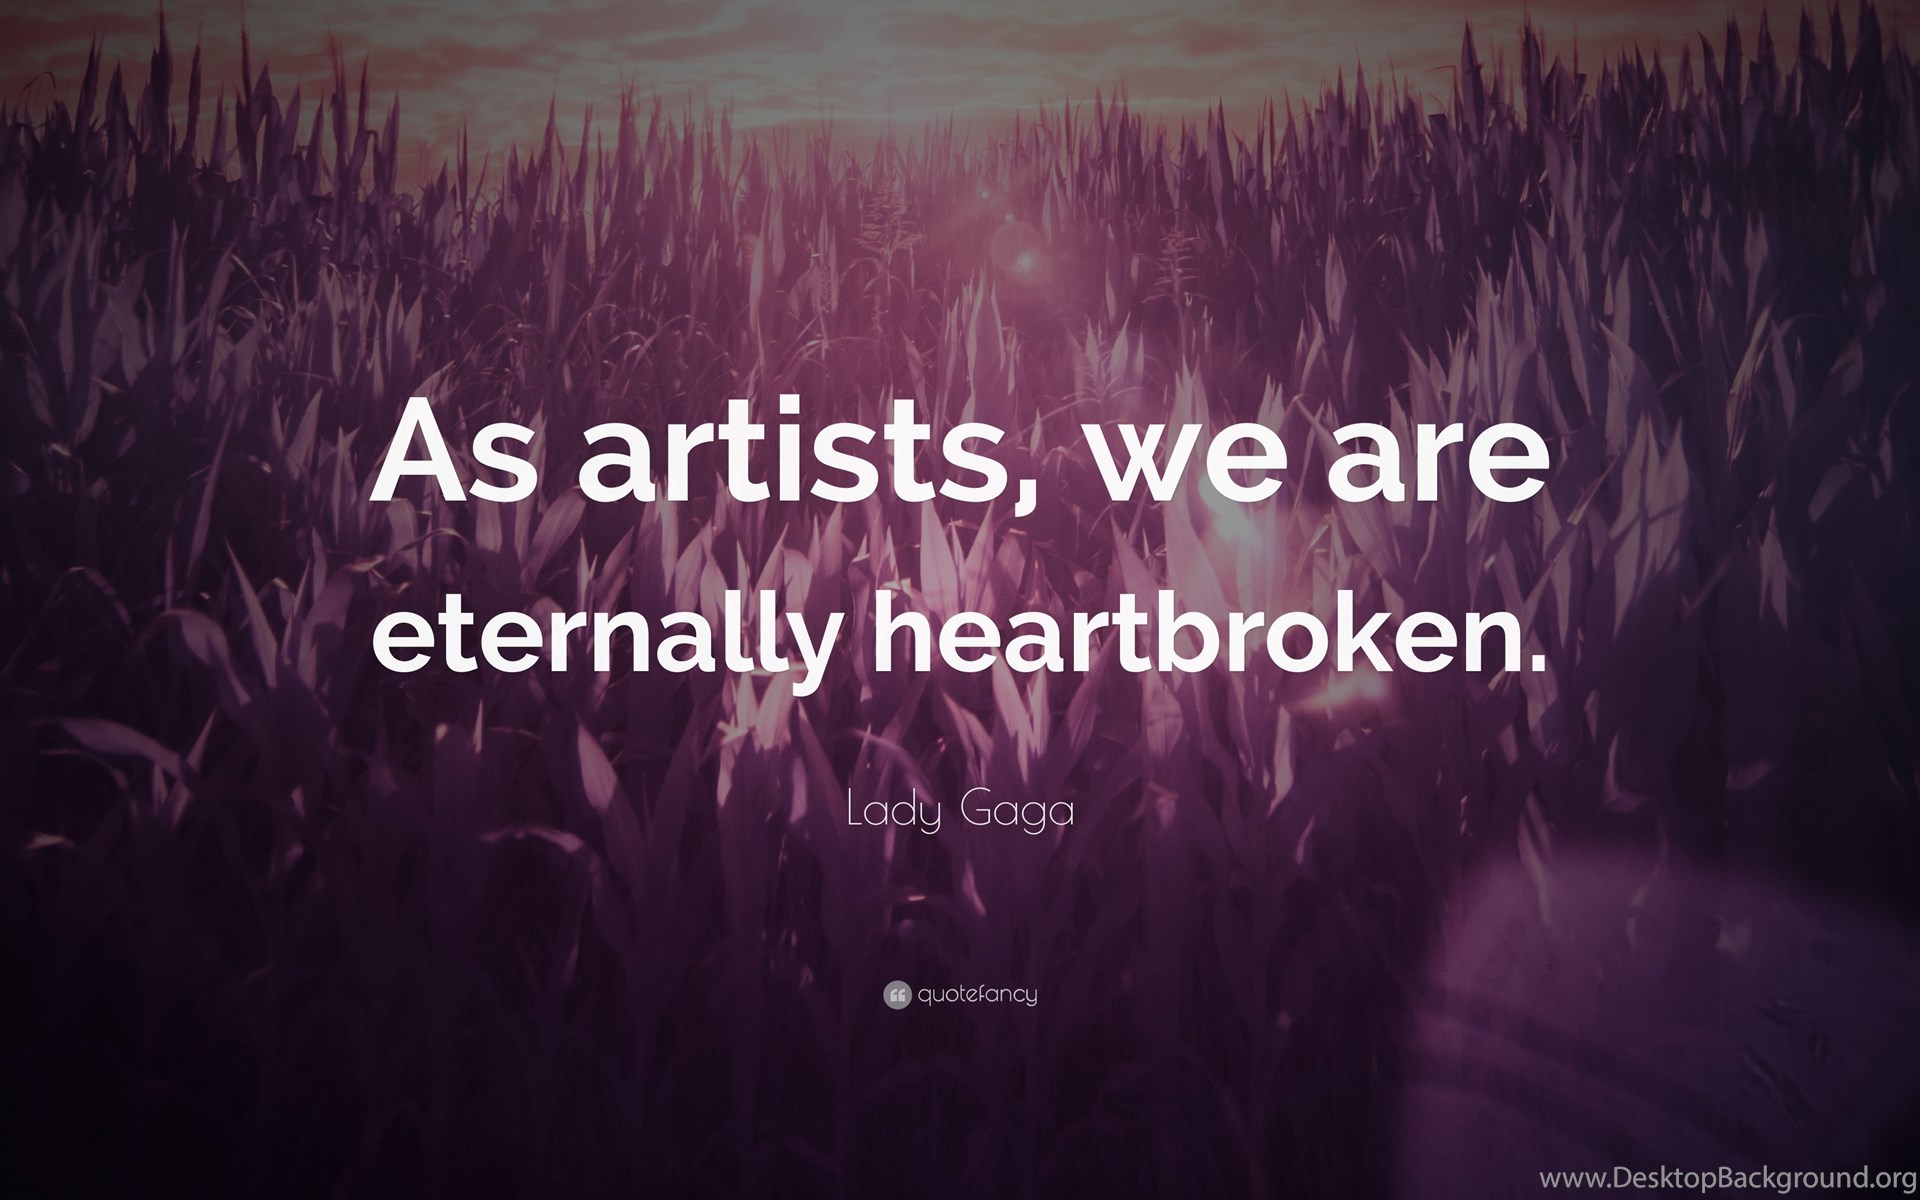 Lady Gaga Quote: "As Artists, We Are Eternally Heartbroken."